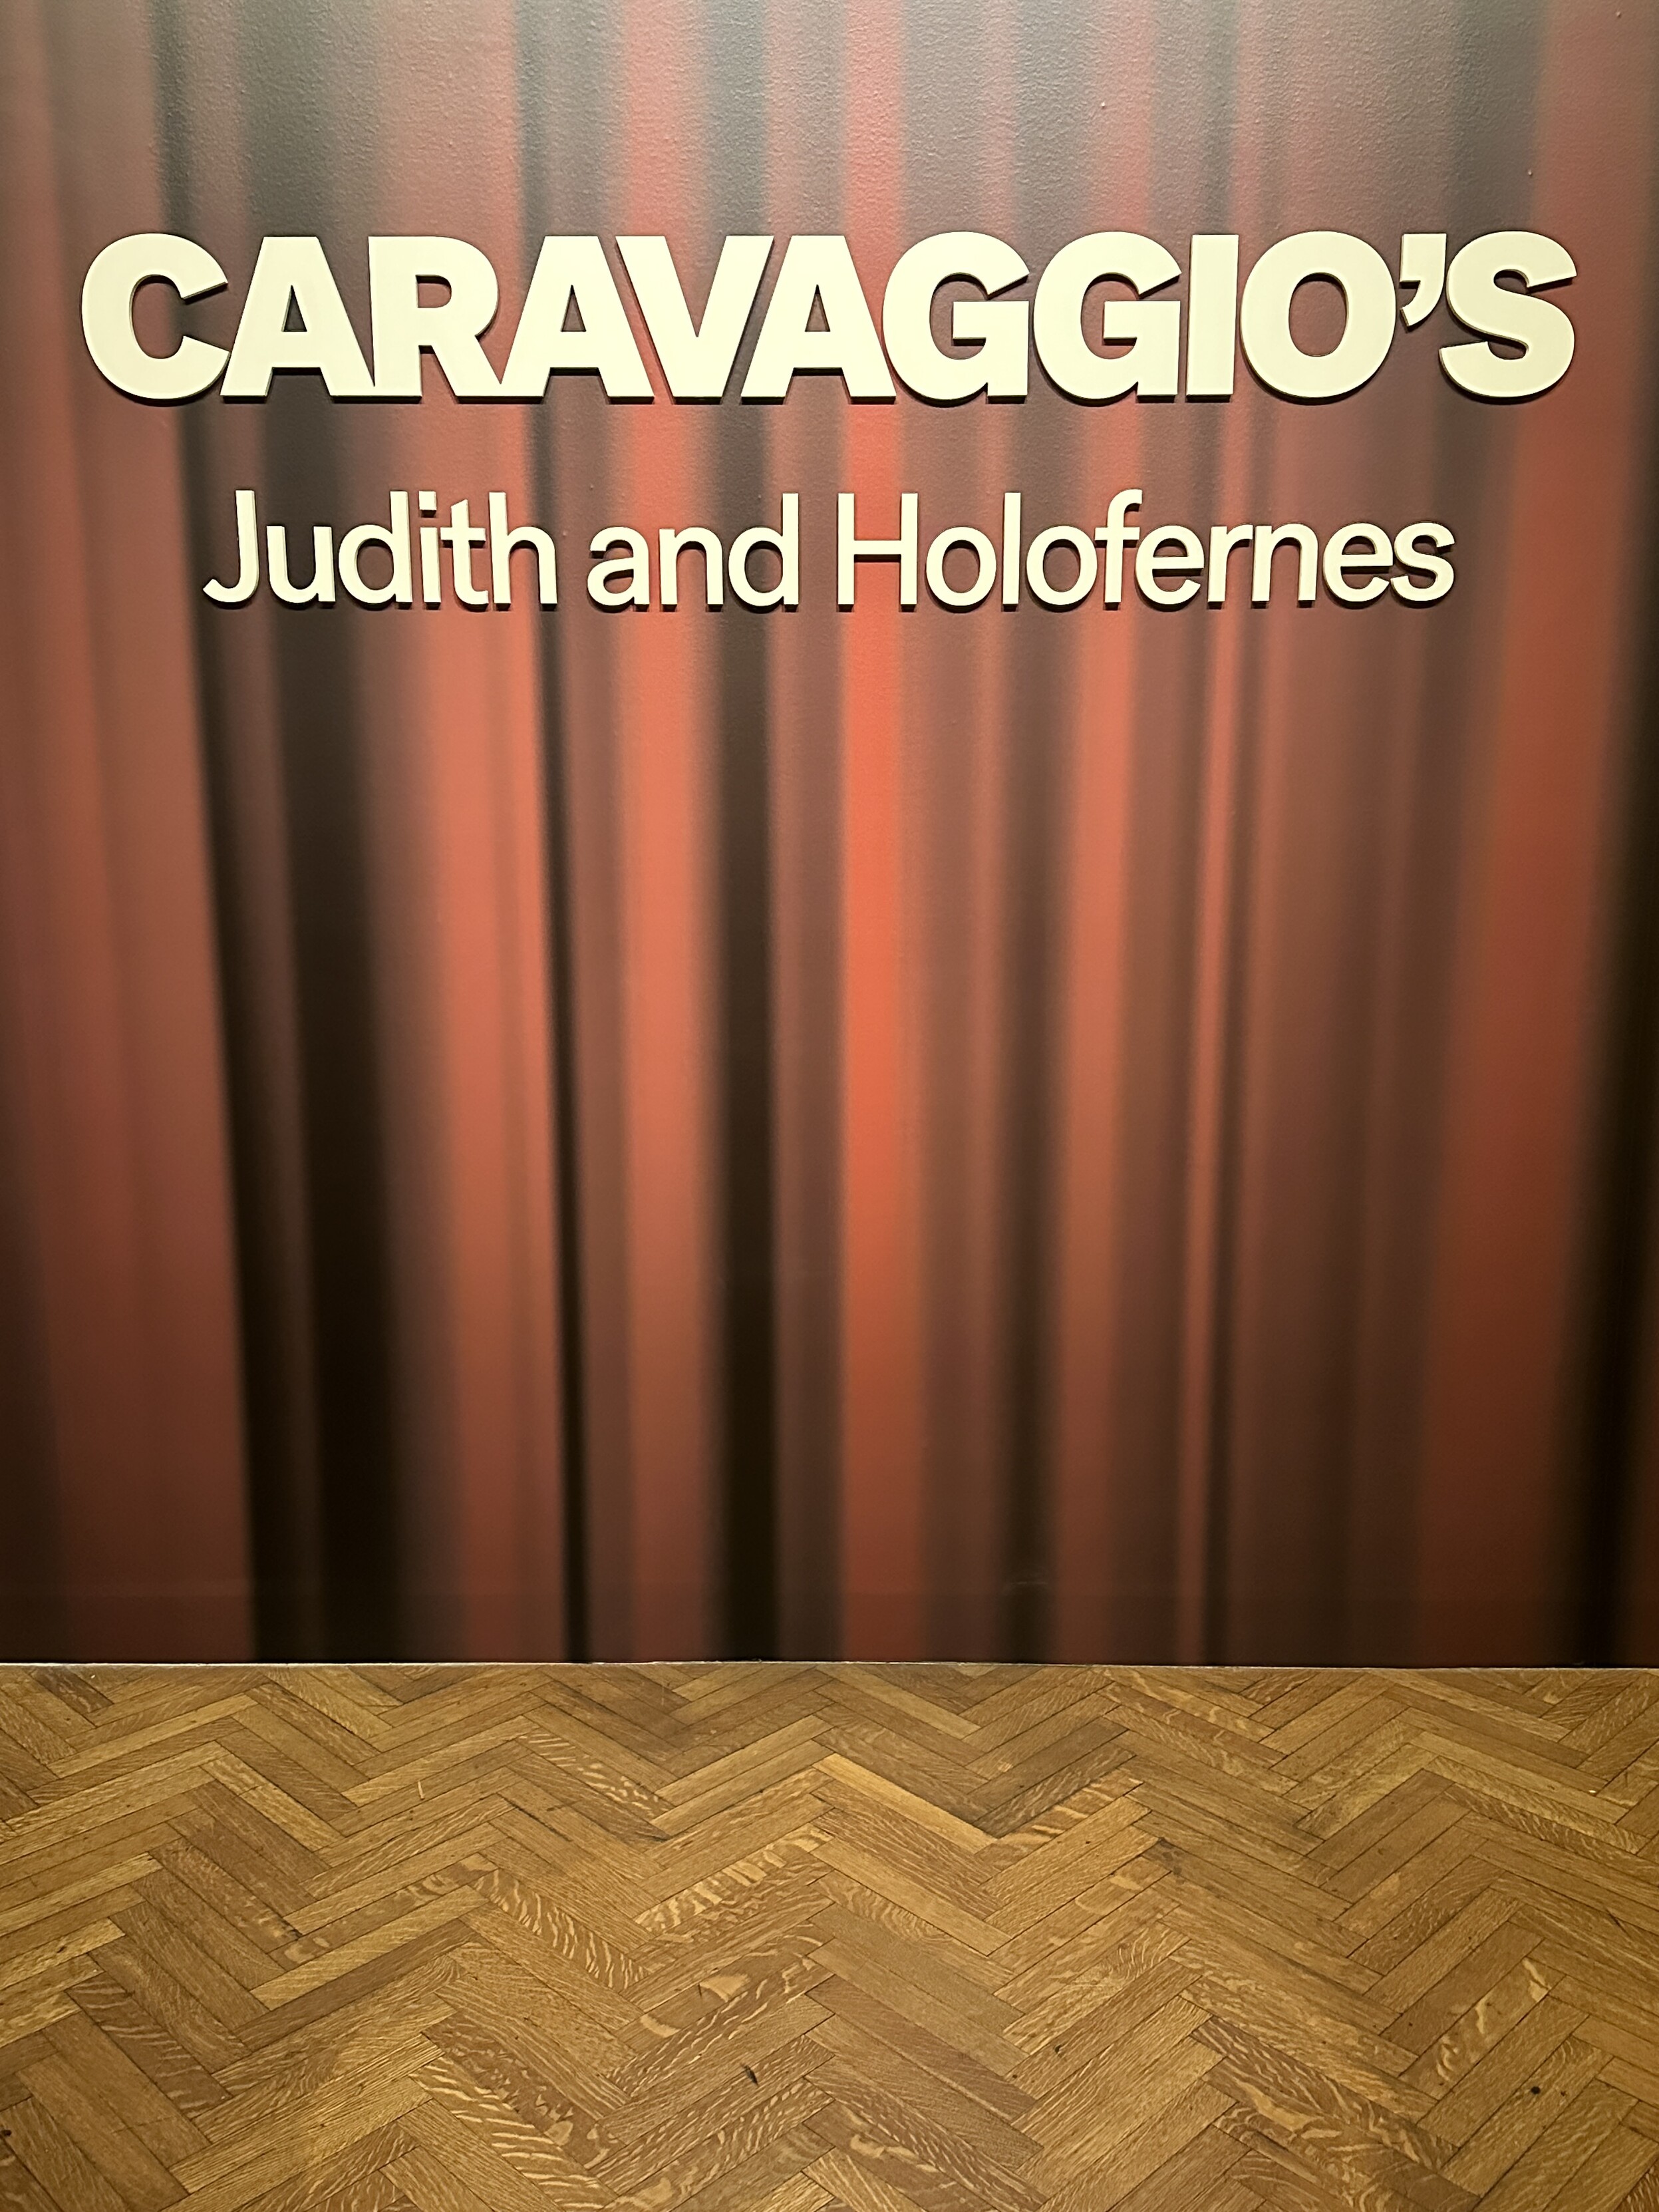 Caravaggio’s Judith and Holofernes signage at the Minneapolis Institute of Art, with the words in white against a red curtain backdrop and zig-zag wood floor pattern below